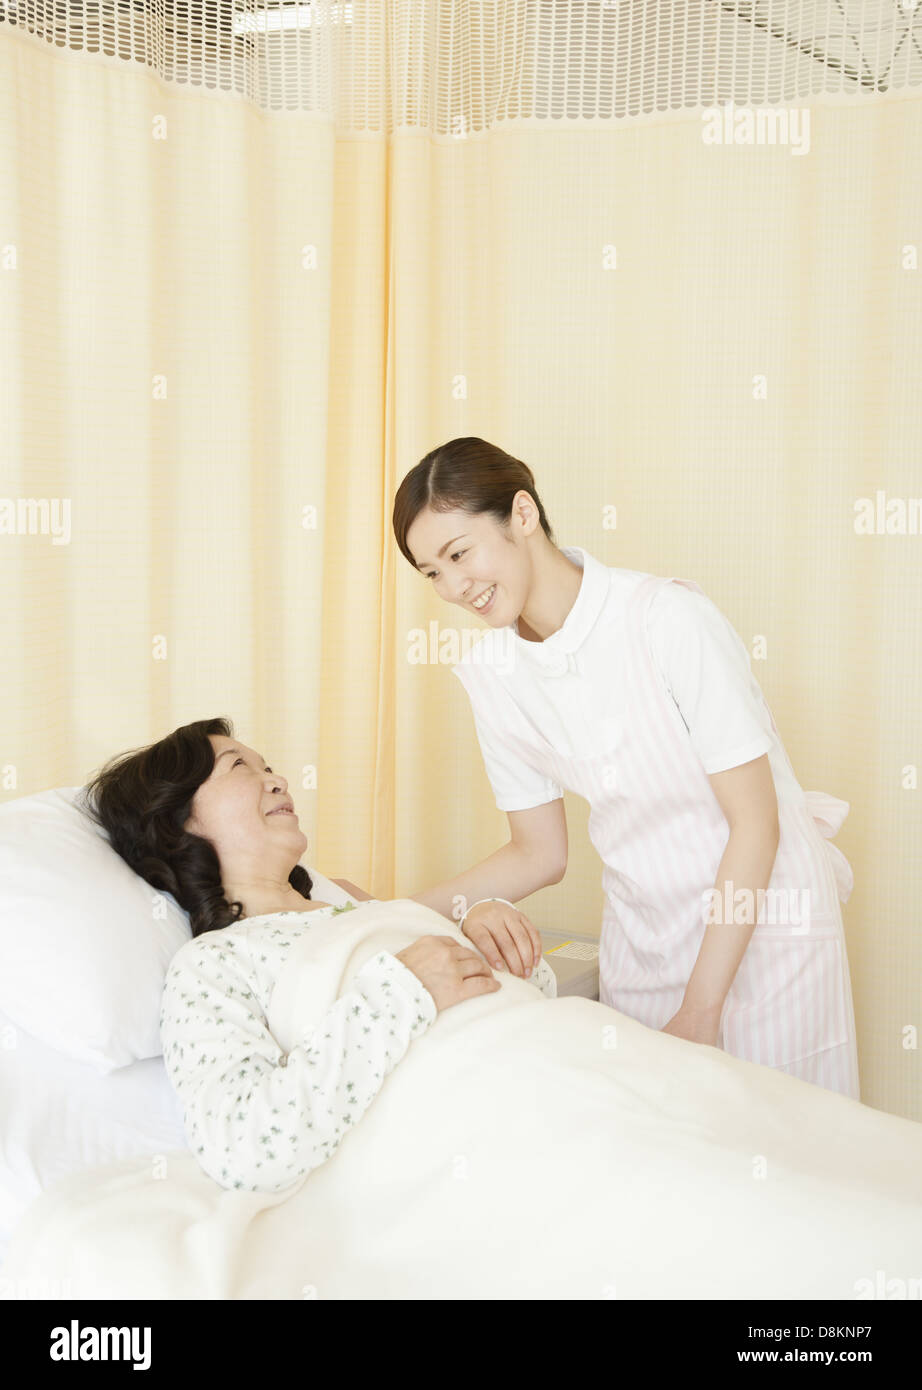 Nurse and patient smiling Stock Photo